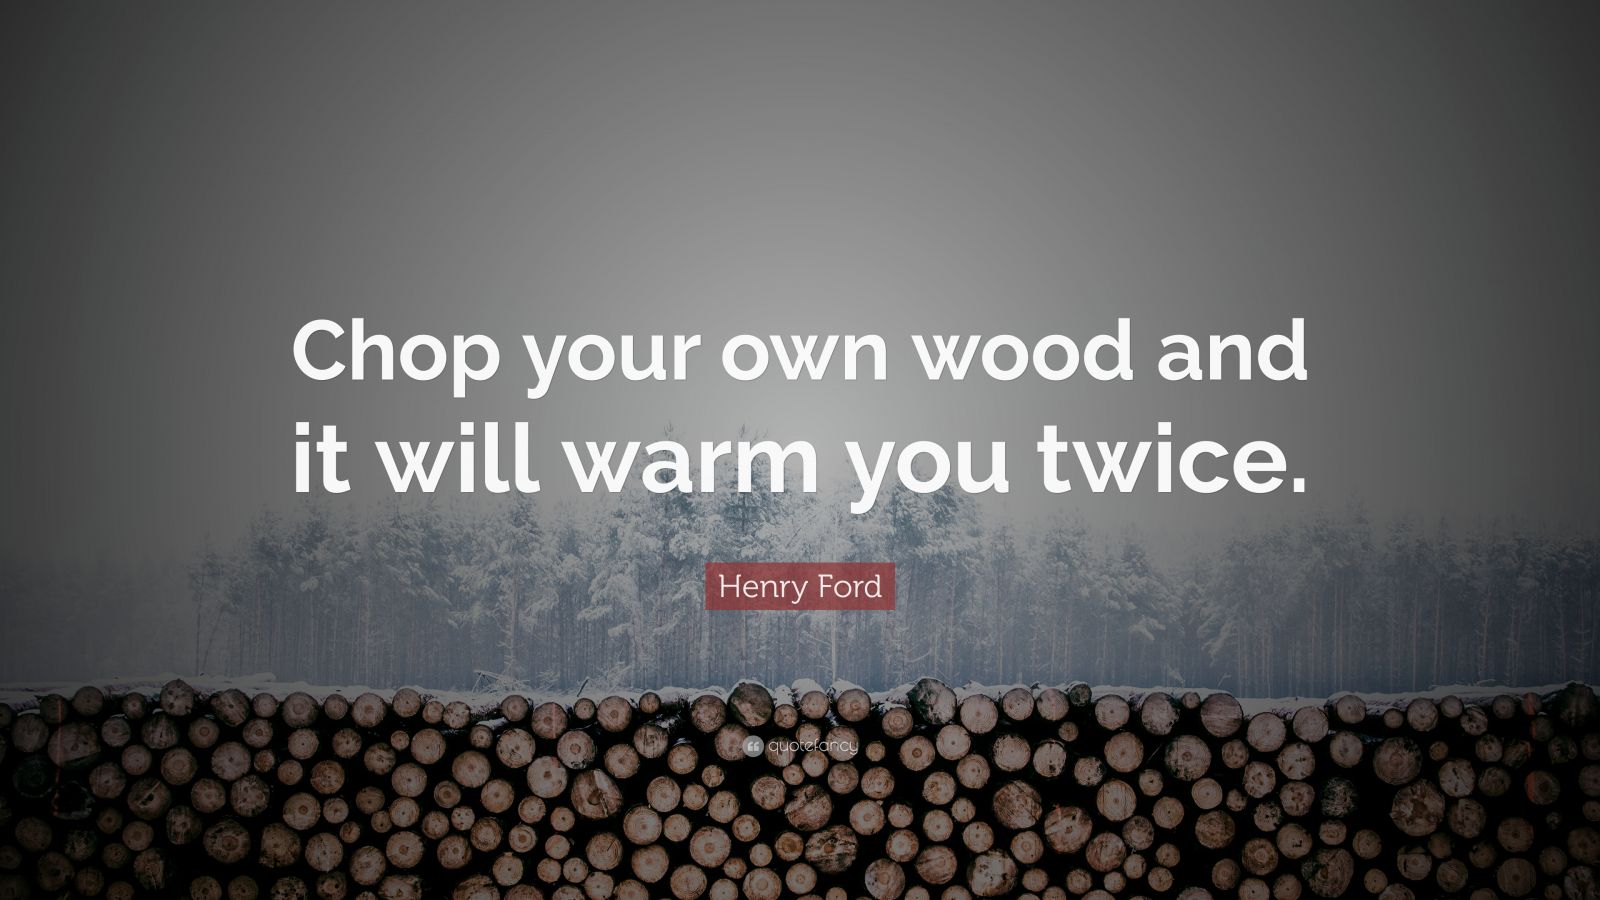 Henry Ford Quote: “Chop your own wood and it will warm you twice.” (22